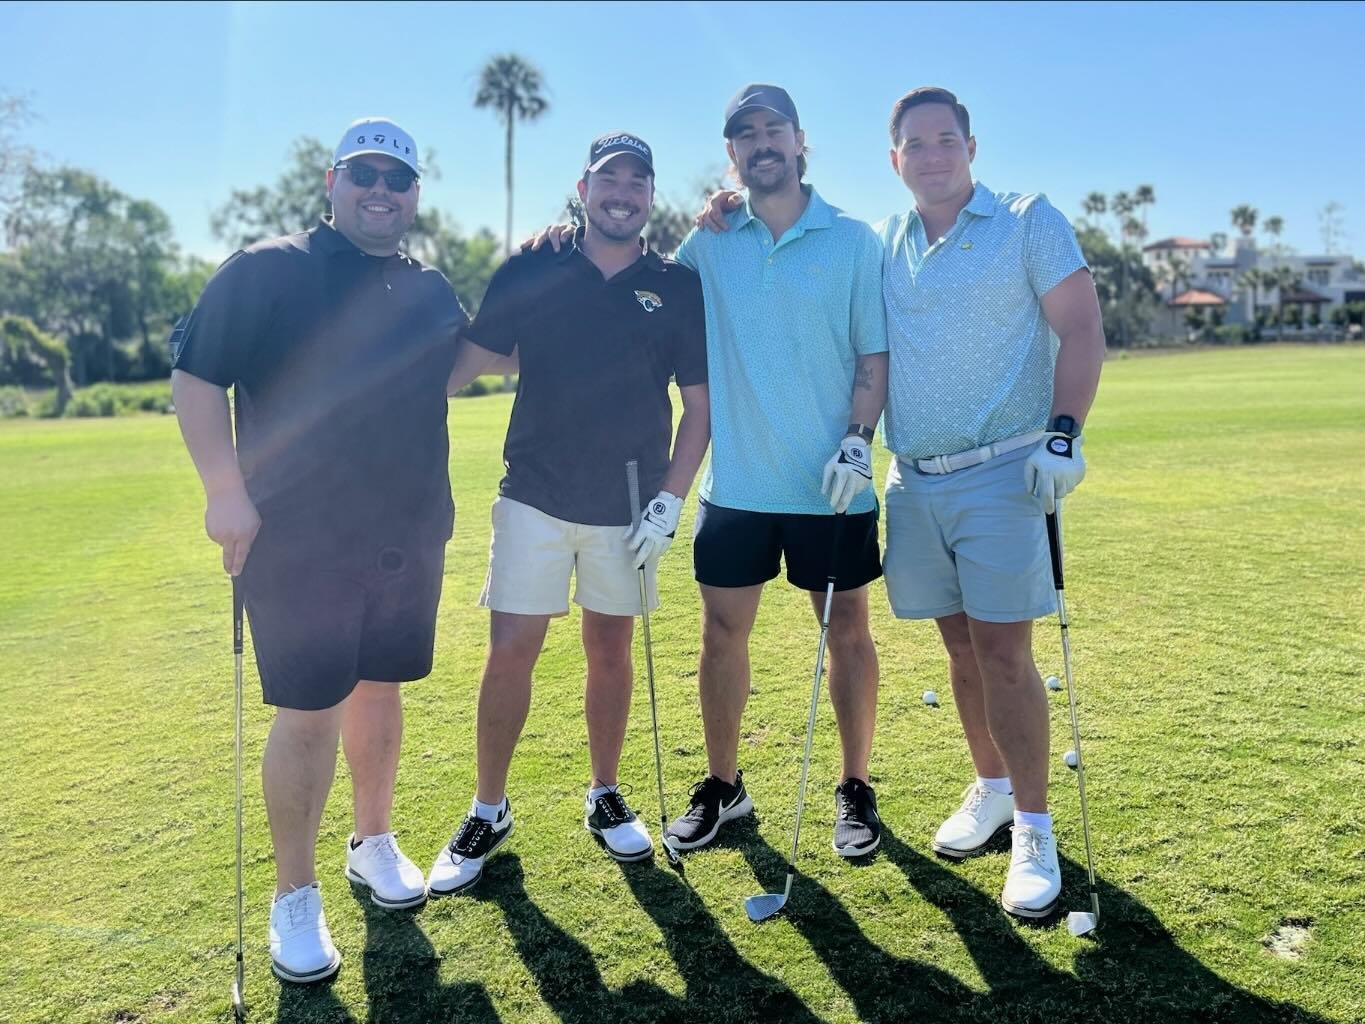 It was a beautiful day for golf + a good day to support our Groundswell partners @bvsa_rhinos! ⛳️ ⚽️ 

Our Groundswell Golf Invitational is always a fun time but made even better when we can raise funds to support a ministry we really care about. And